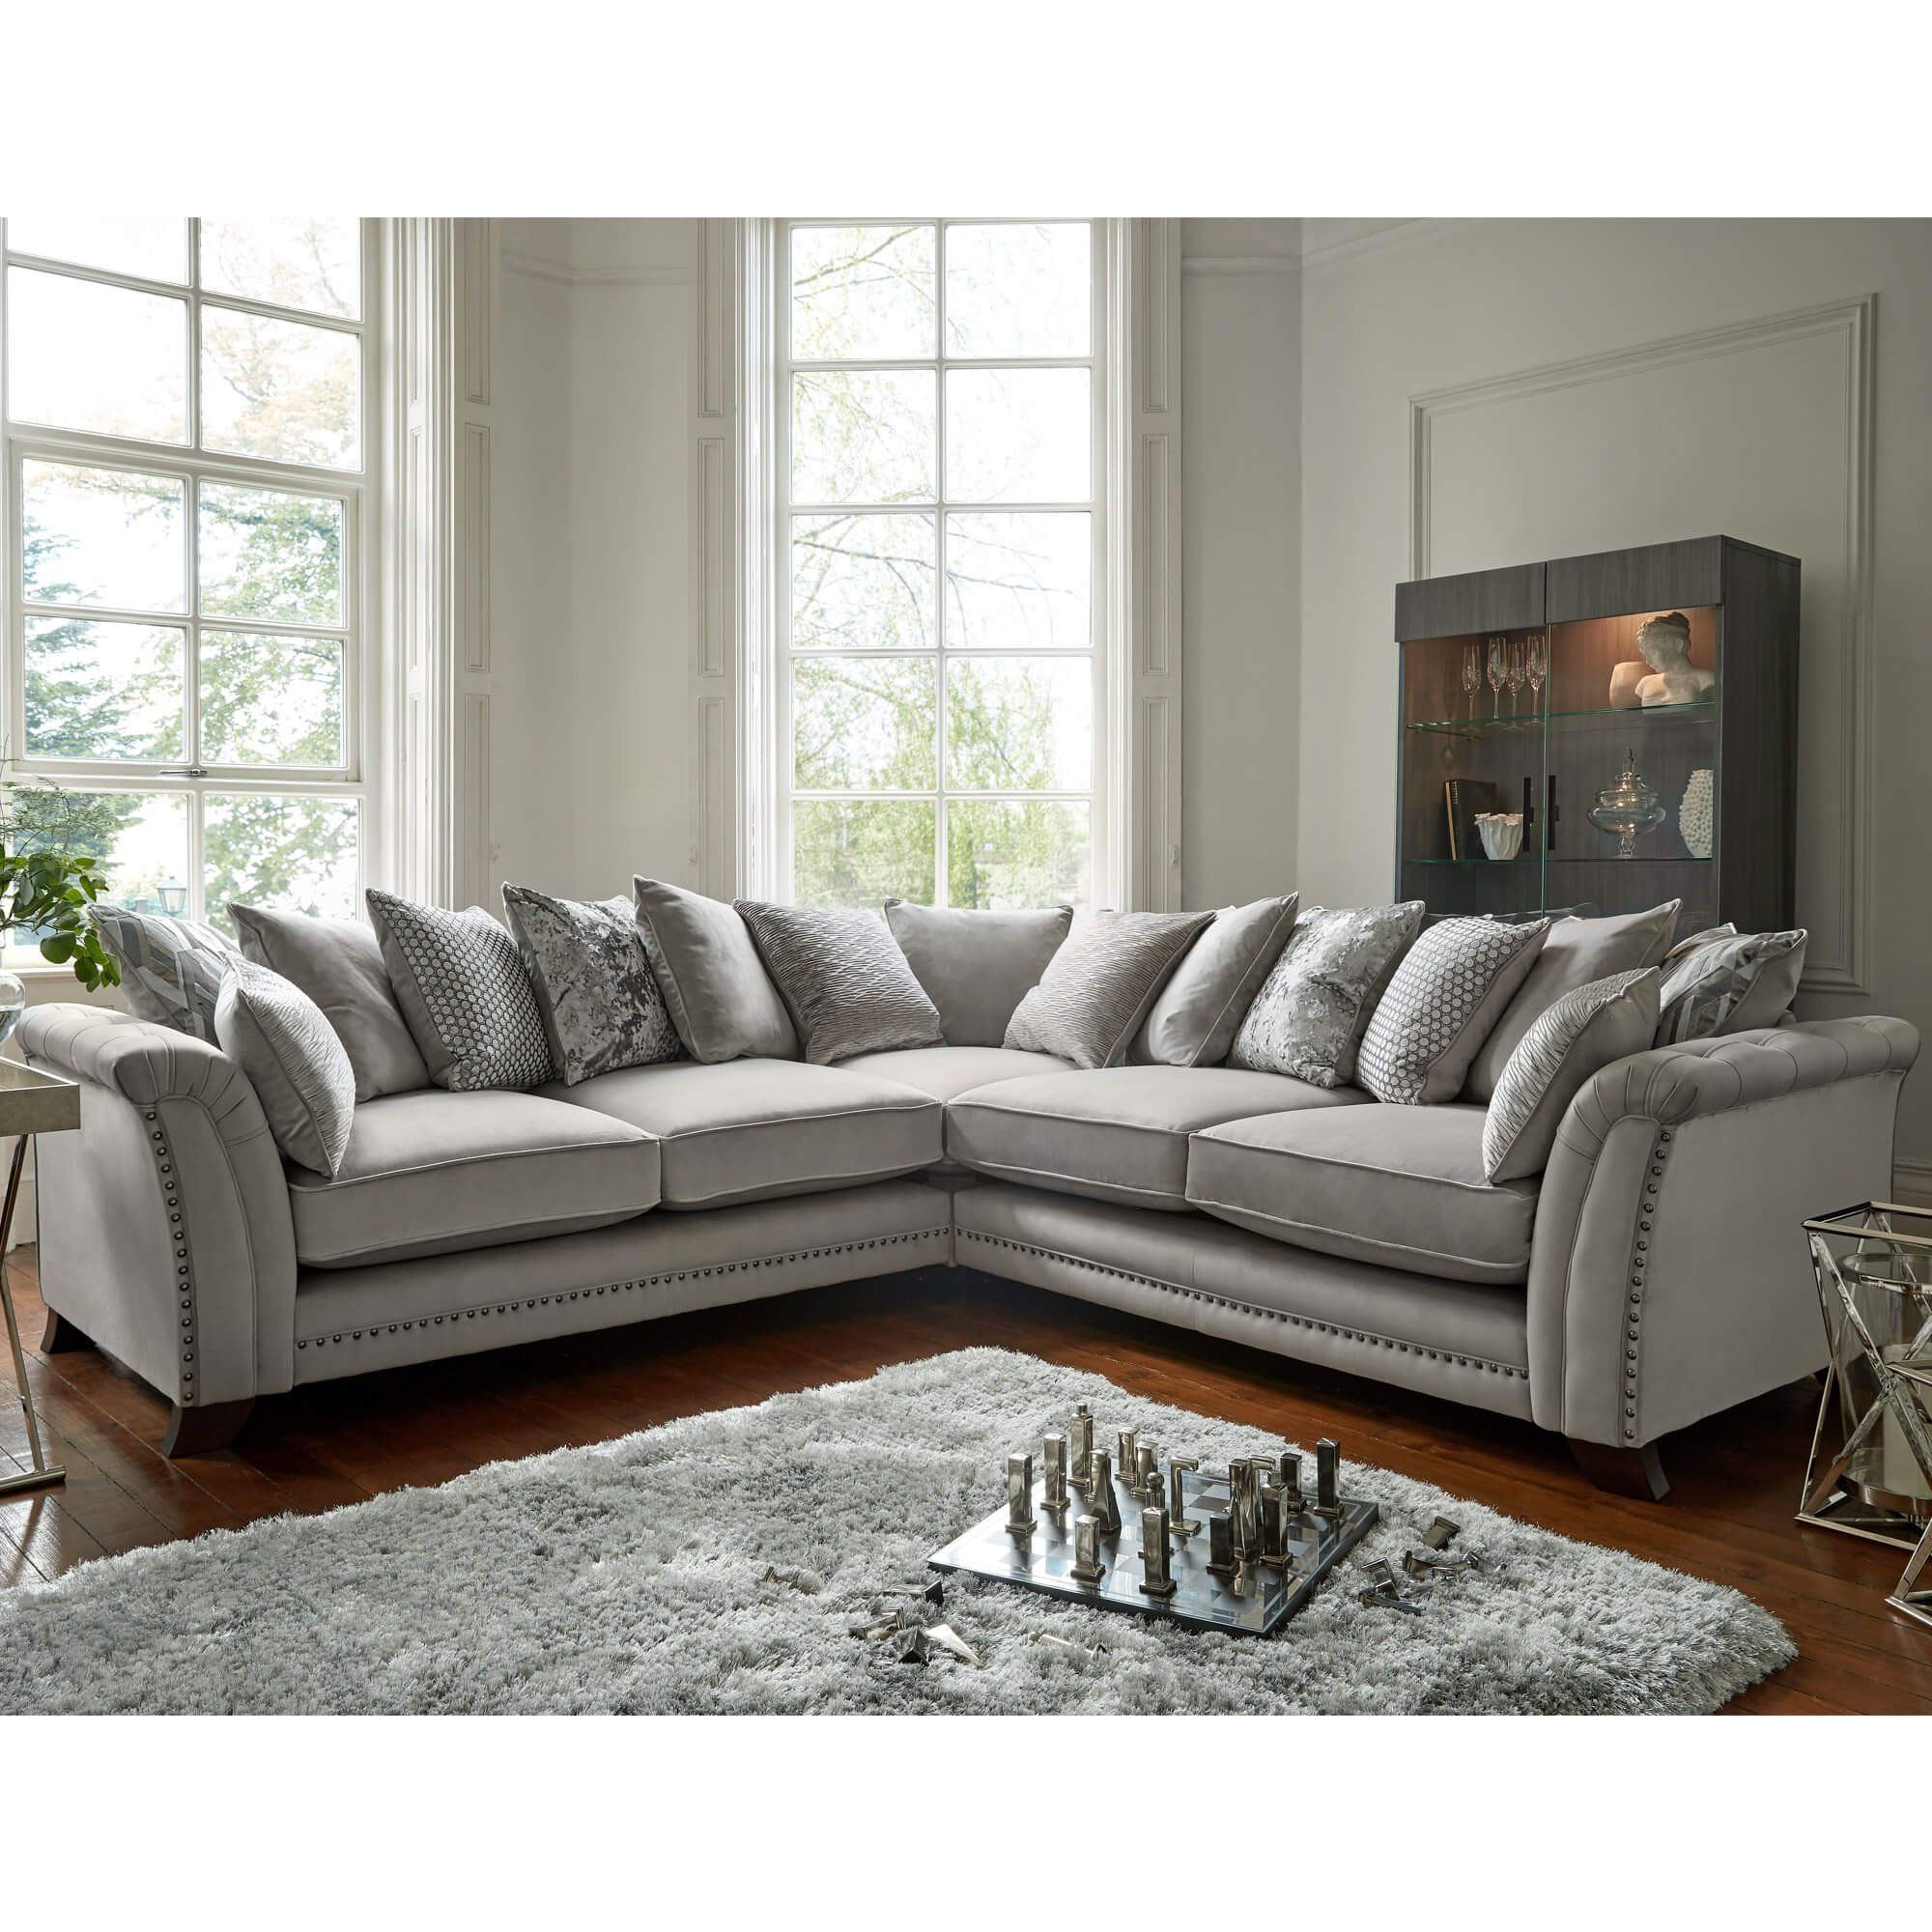 Fairfield Silver Velvet Pillow Back Sofa Collection With Regard To Pillowback Sofa Sectionals (View 10 of 15)